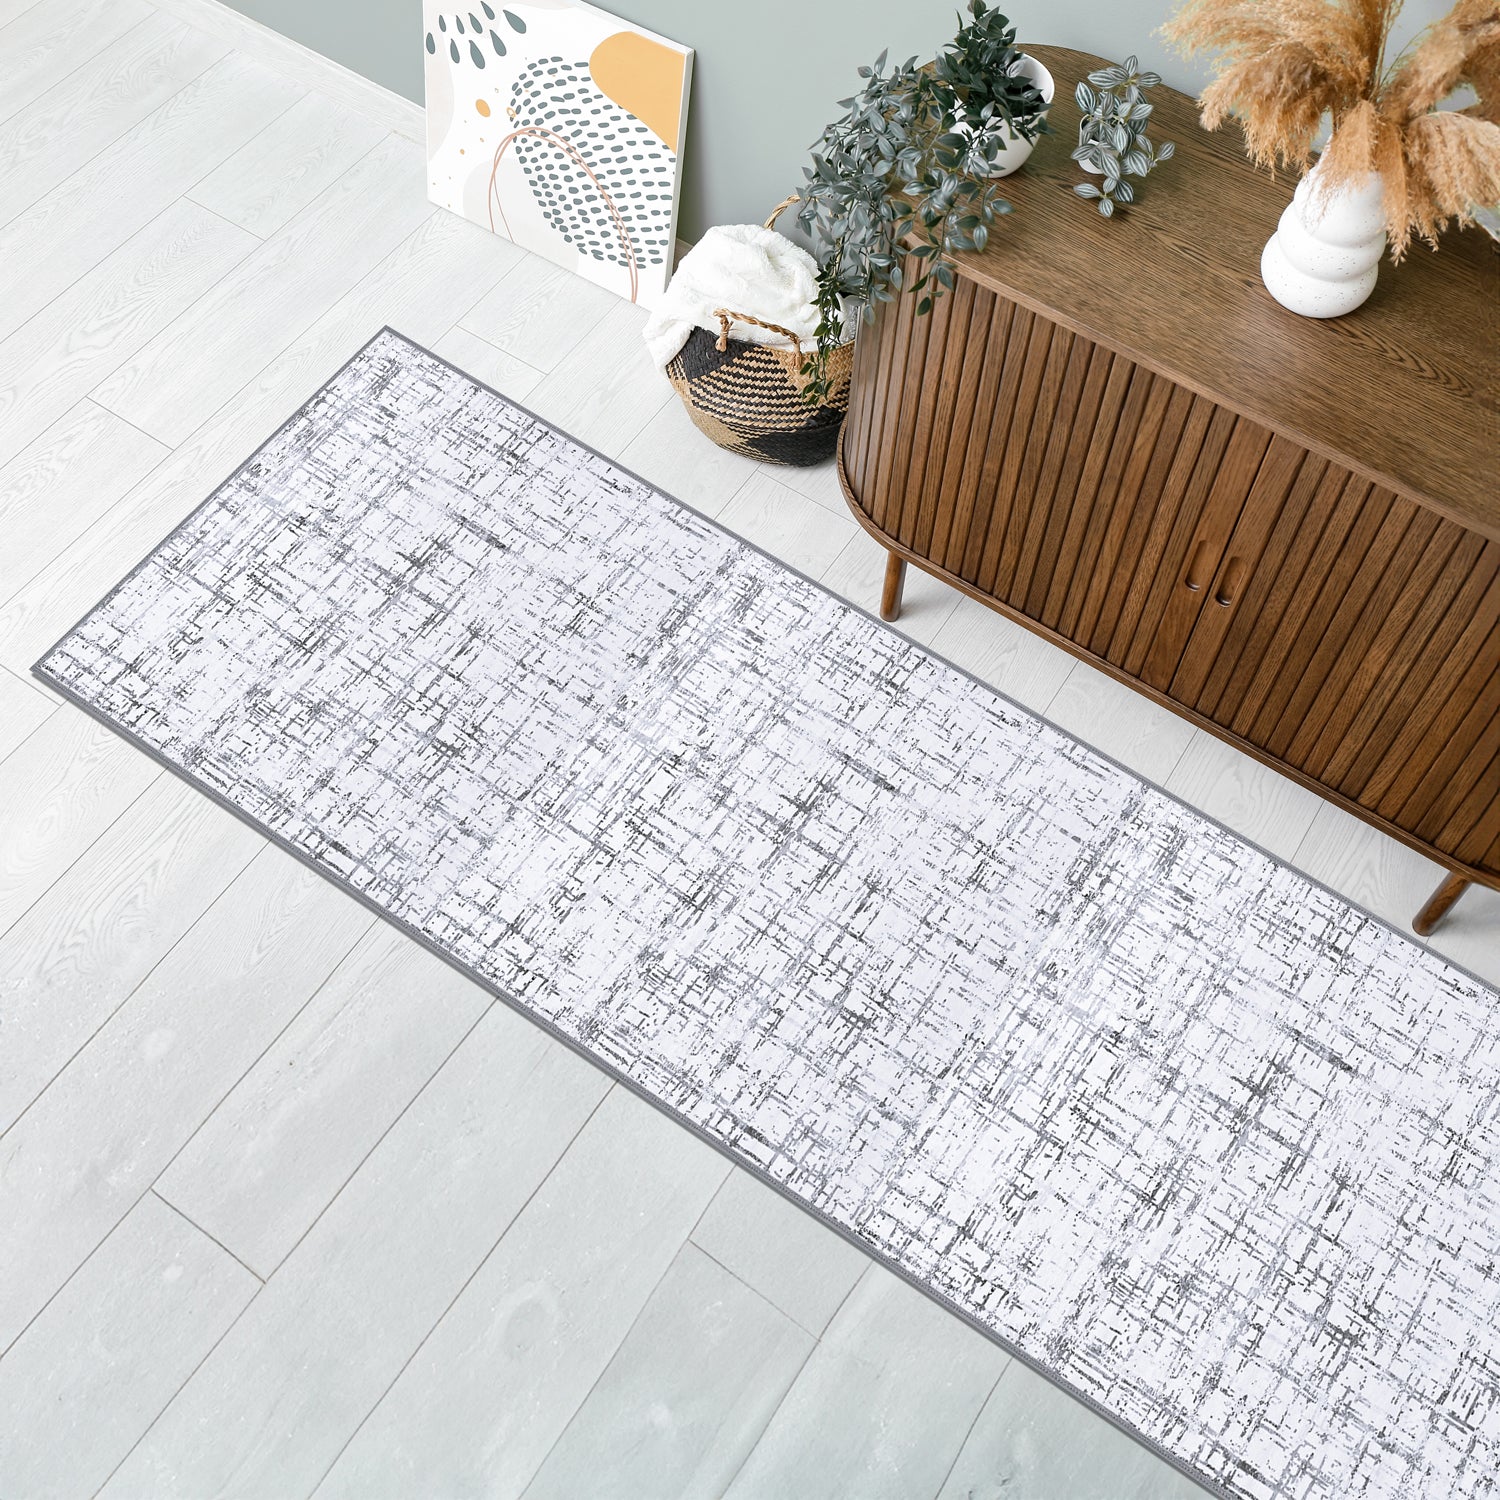 Evia Grey & White Machine Washable Rug and Runner - For Living Room, Dining Room, Bedroom, Kitchens, Kids/Nursery Room